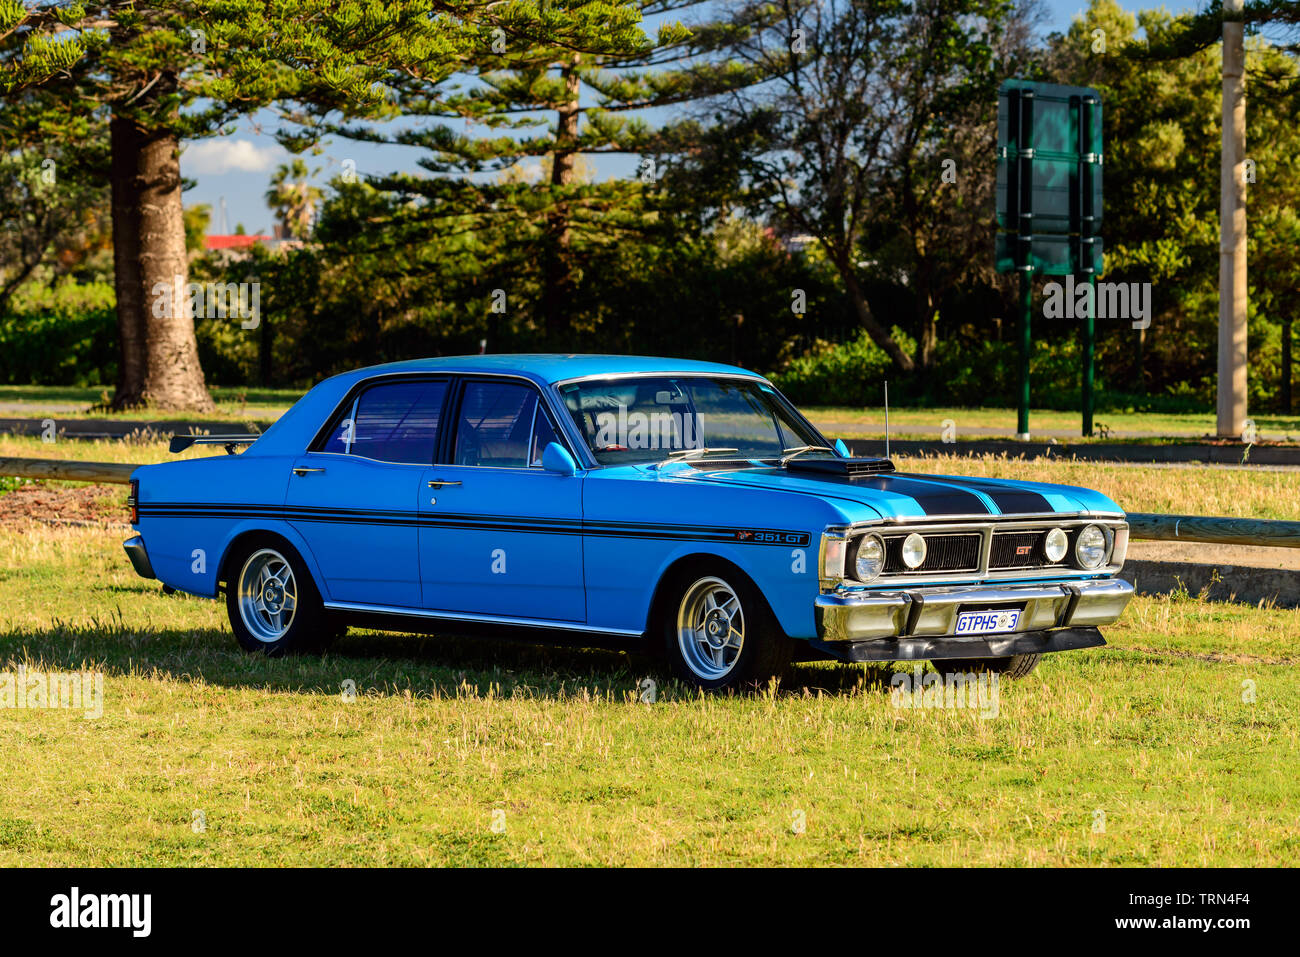 Port Adelaide, South Australia - October 14, 2017: Iconic Australian made Ford Falcon 351-GT parked on the grass on a day Stock Photo